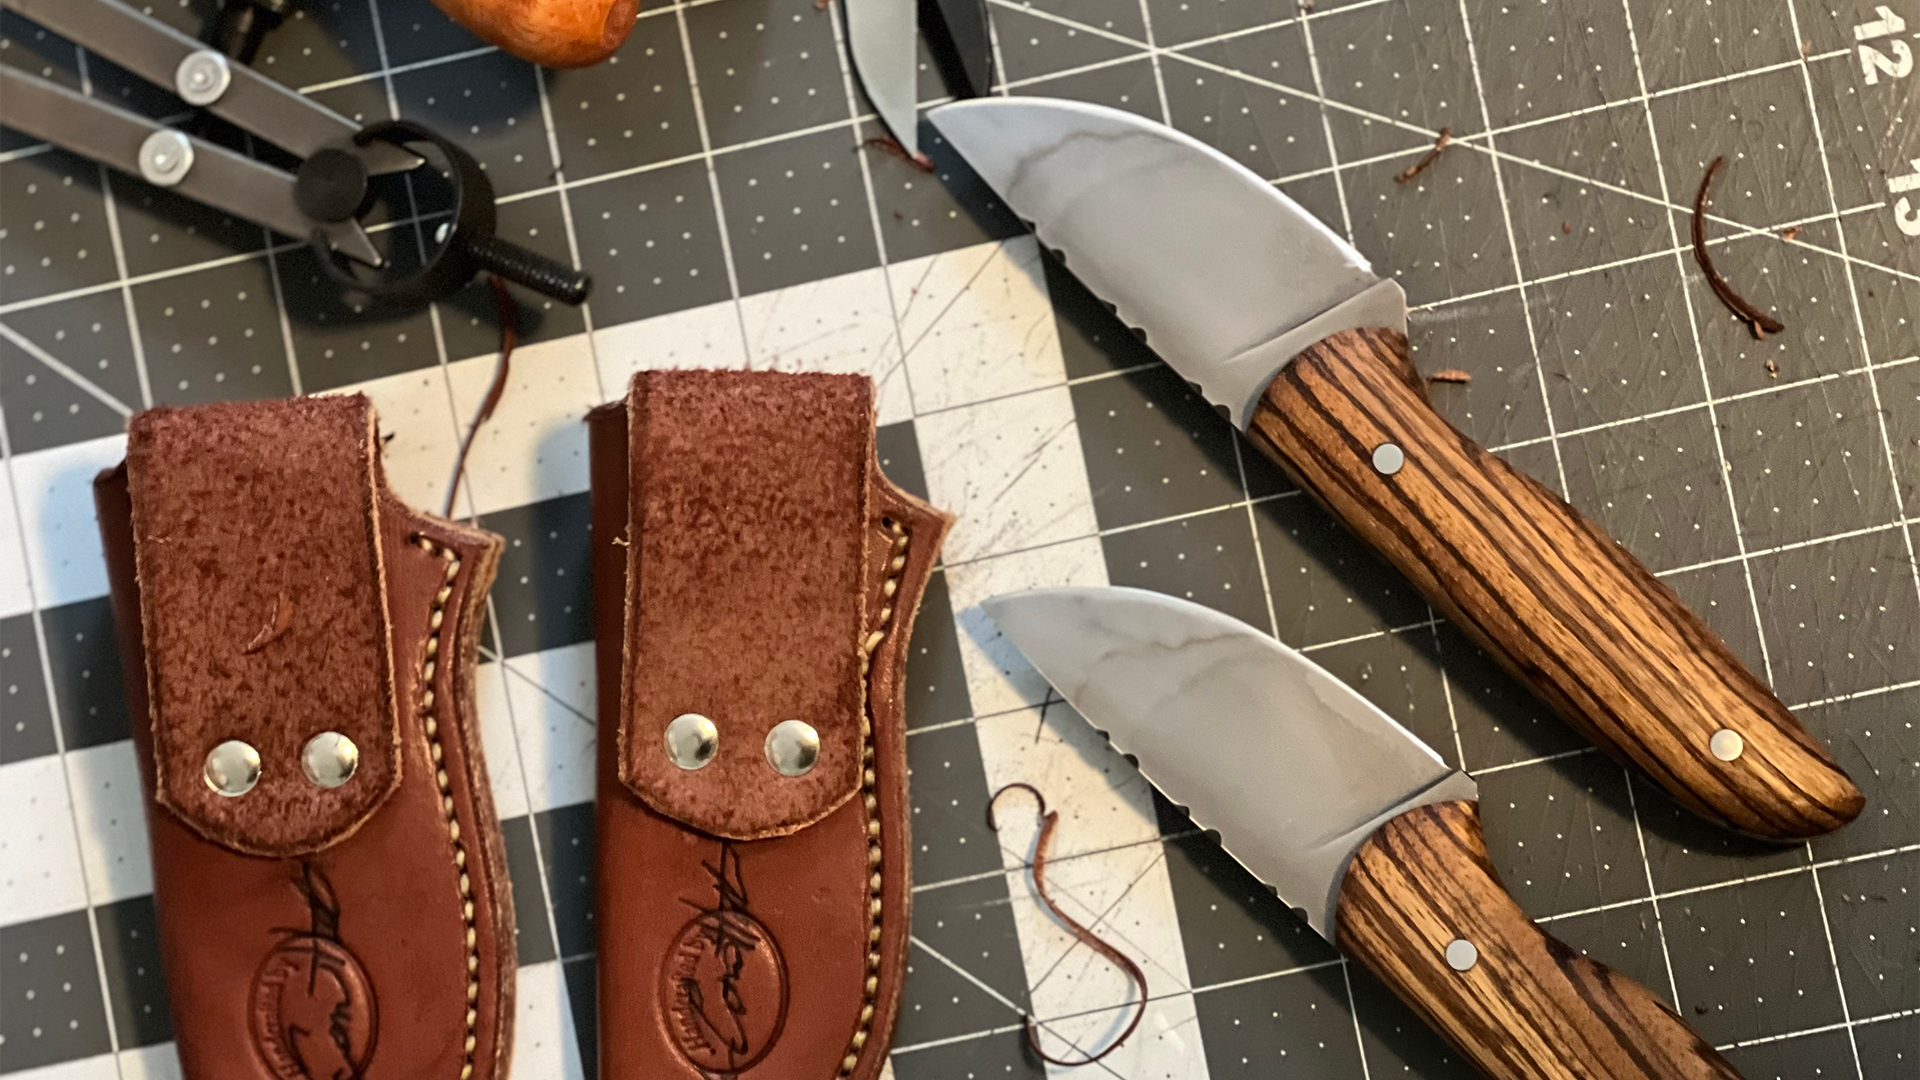 Handcrafted and field tested knives, leatherwork, bushcraft gear.